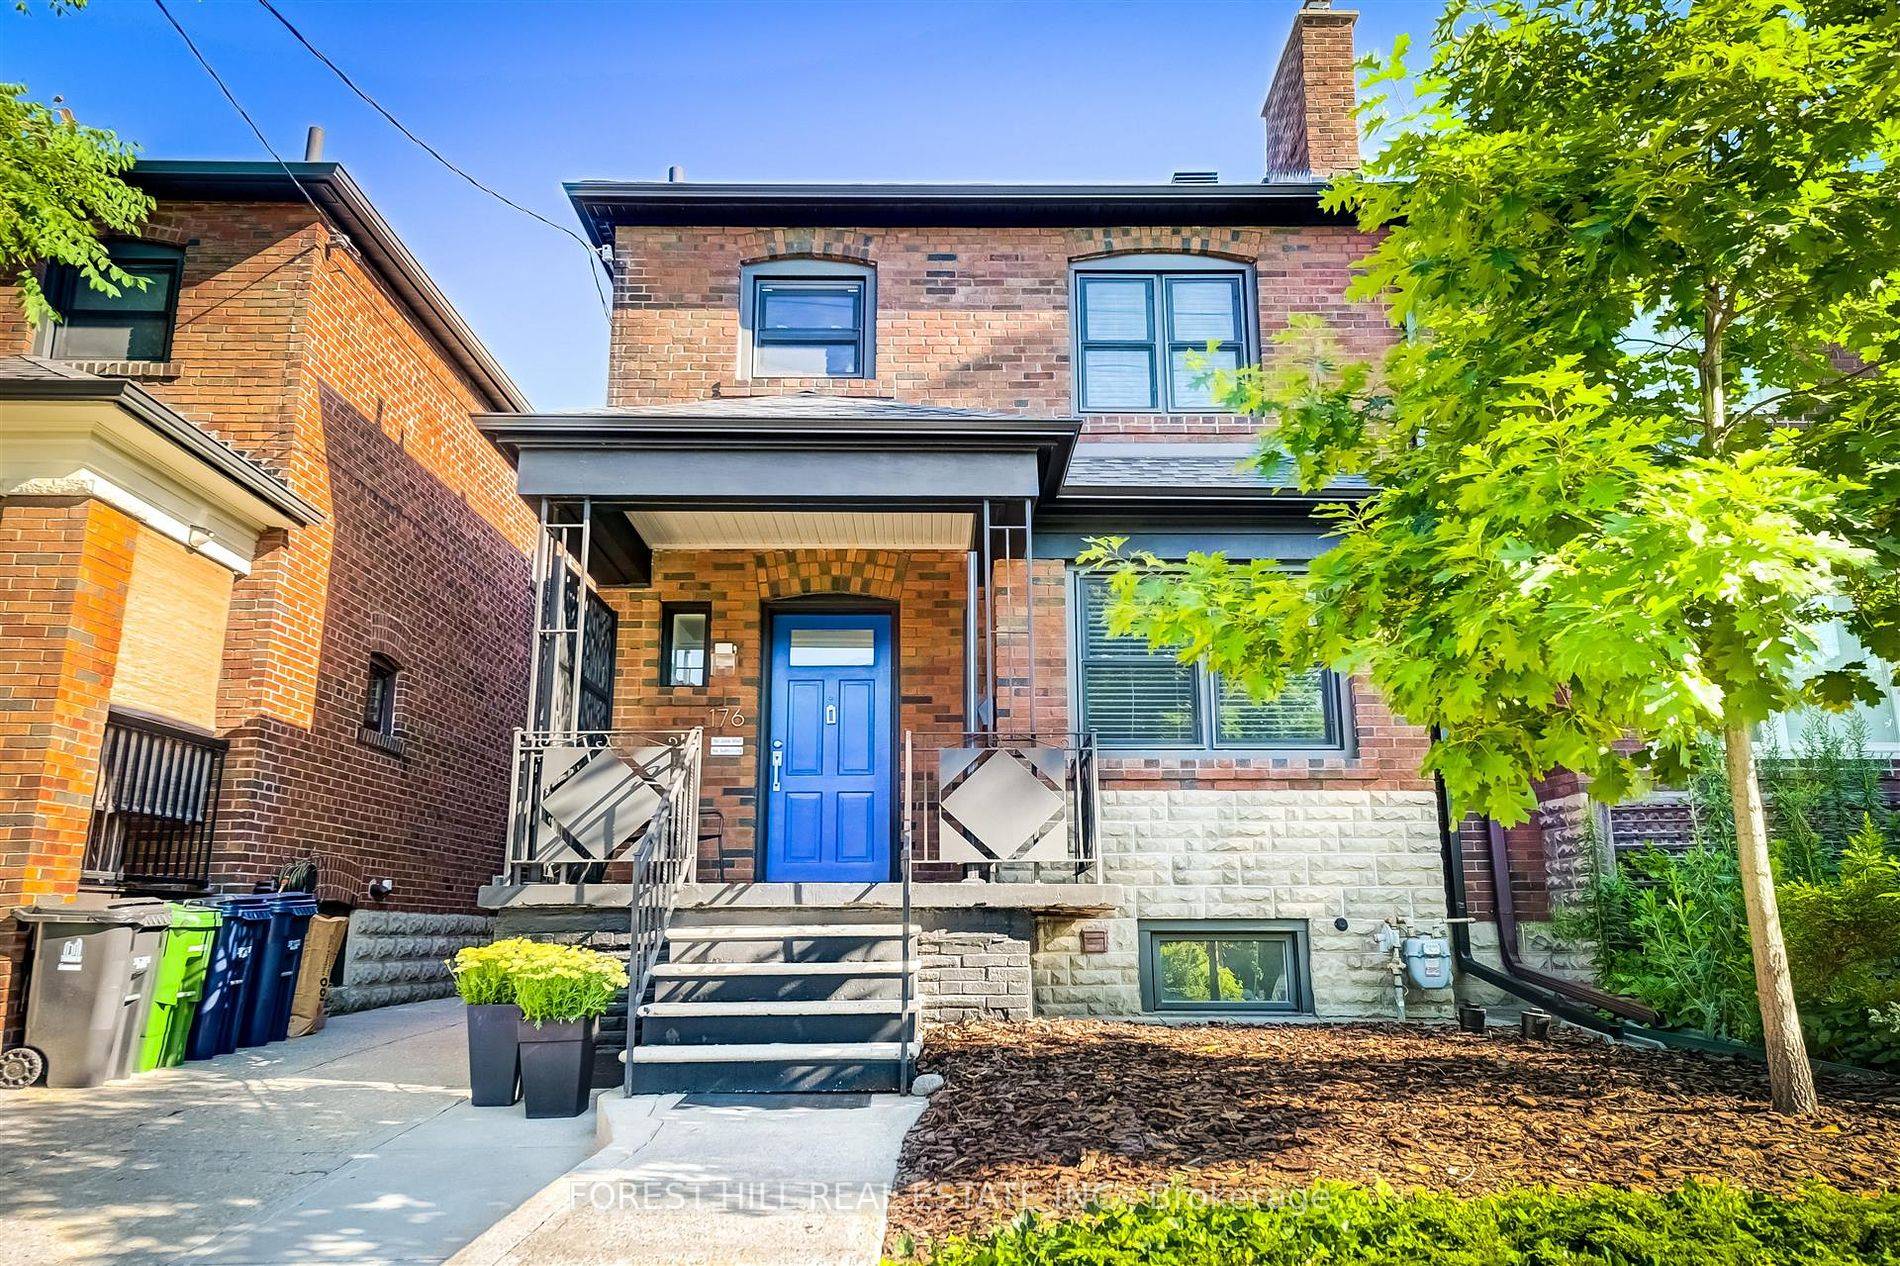 Welcome To 176 Pendrith Street, A Fully Furnished, Short Term 6 10 Mth Lease, In An Excellent, Family, Friendly Neighbourhood Near Christie Pits Park !